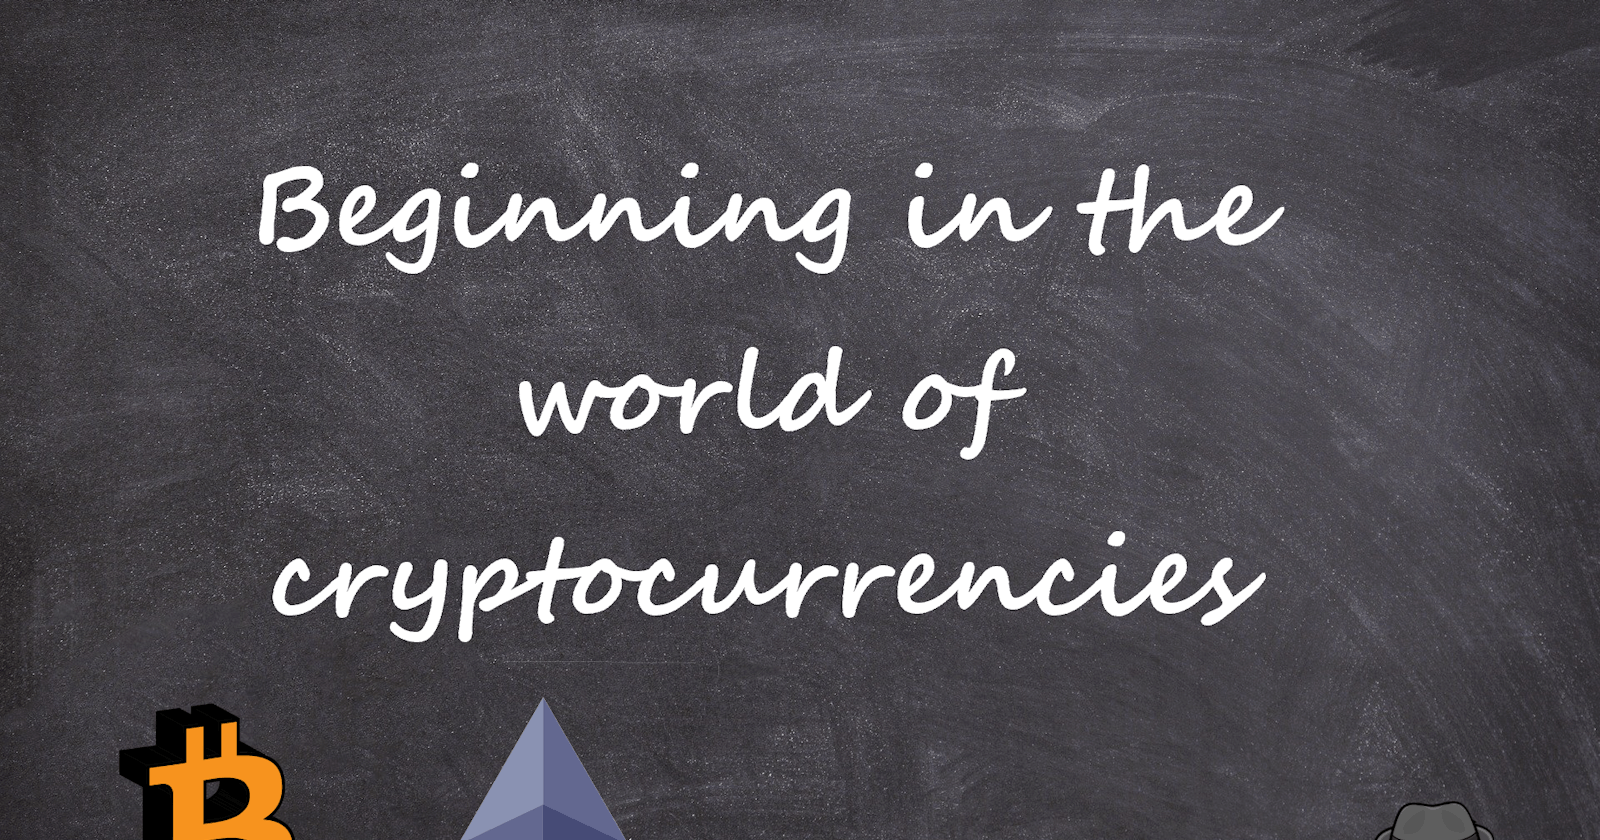 Beginning in the world of cryptocurrencies